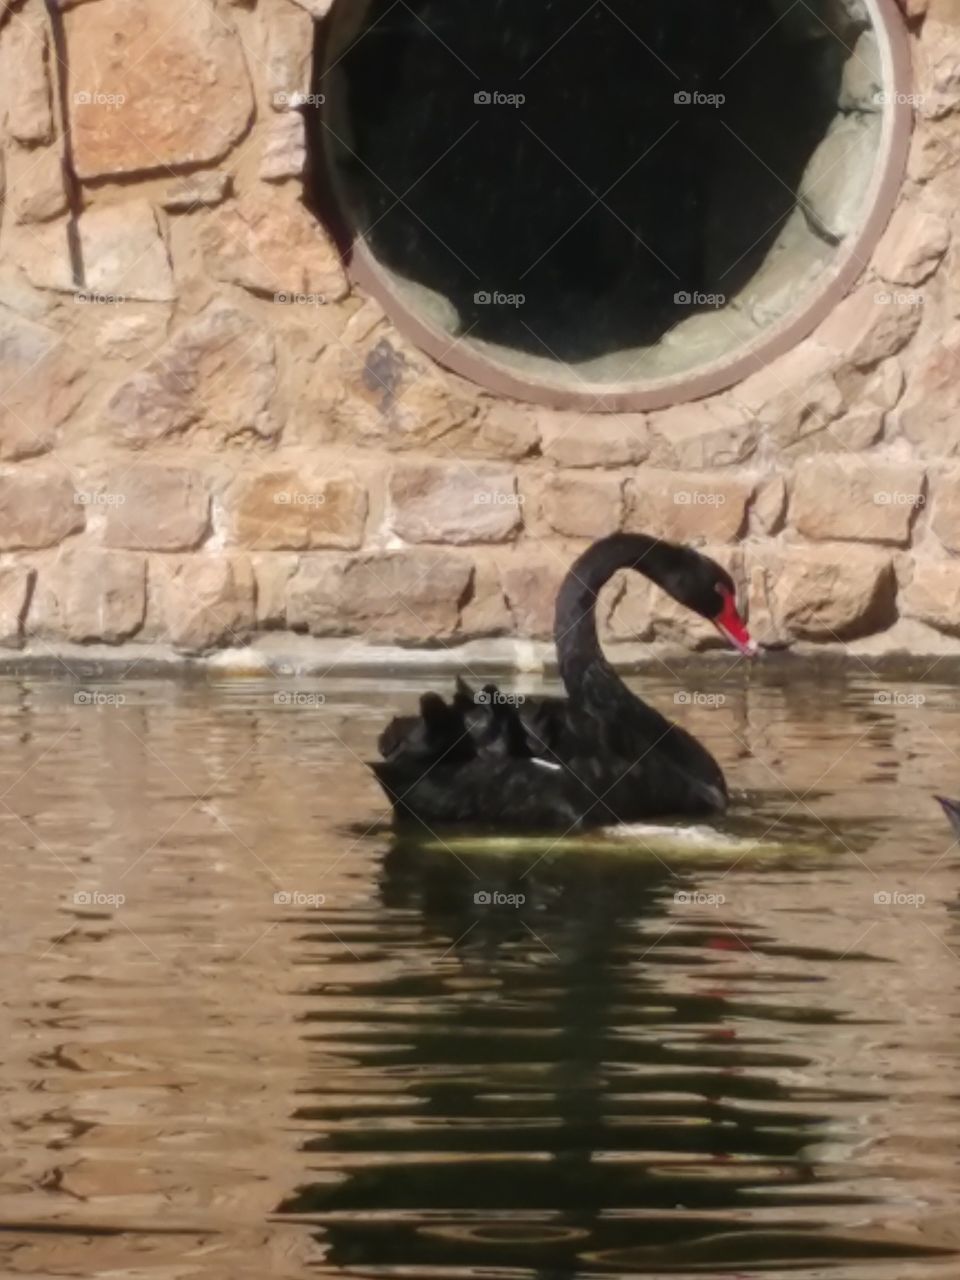 Elegant black swan searching for morsels of food thrown from  wooden deck by patrons of waterside restaurant.